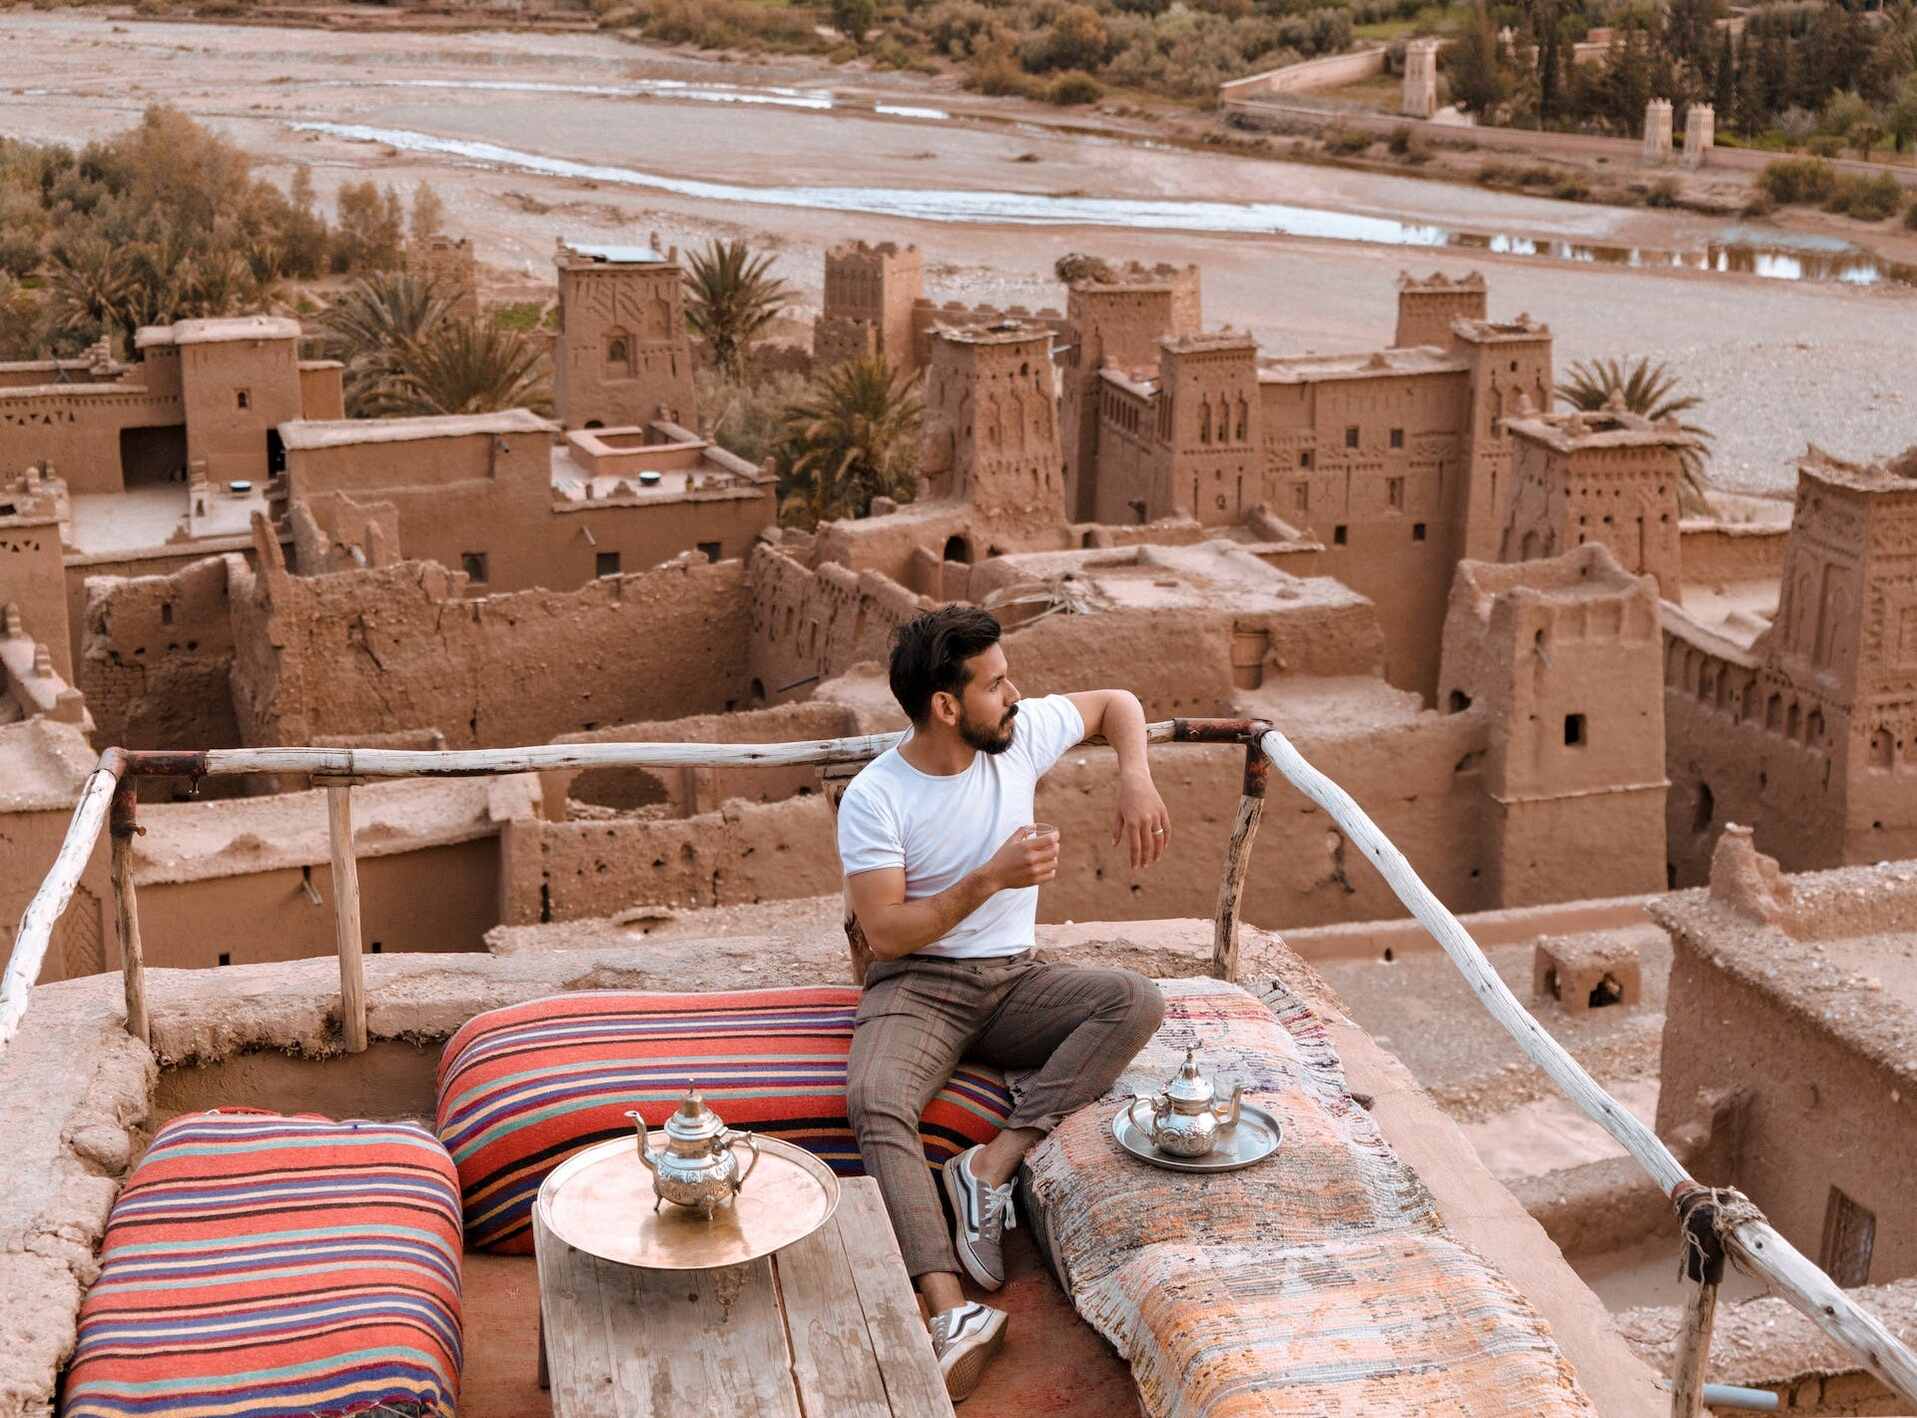 man sitting on vacation in nice outfit overlooking desert city